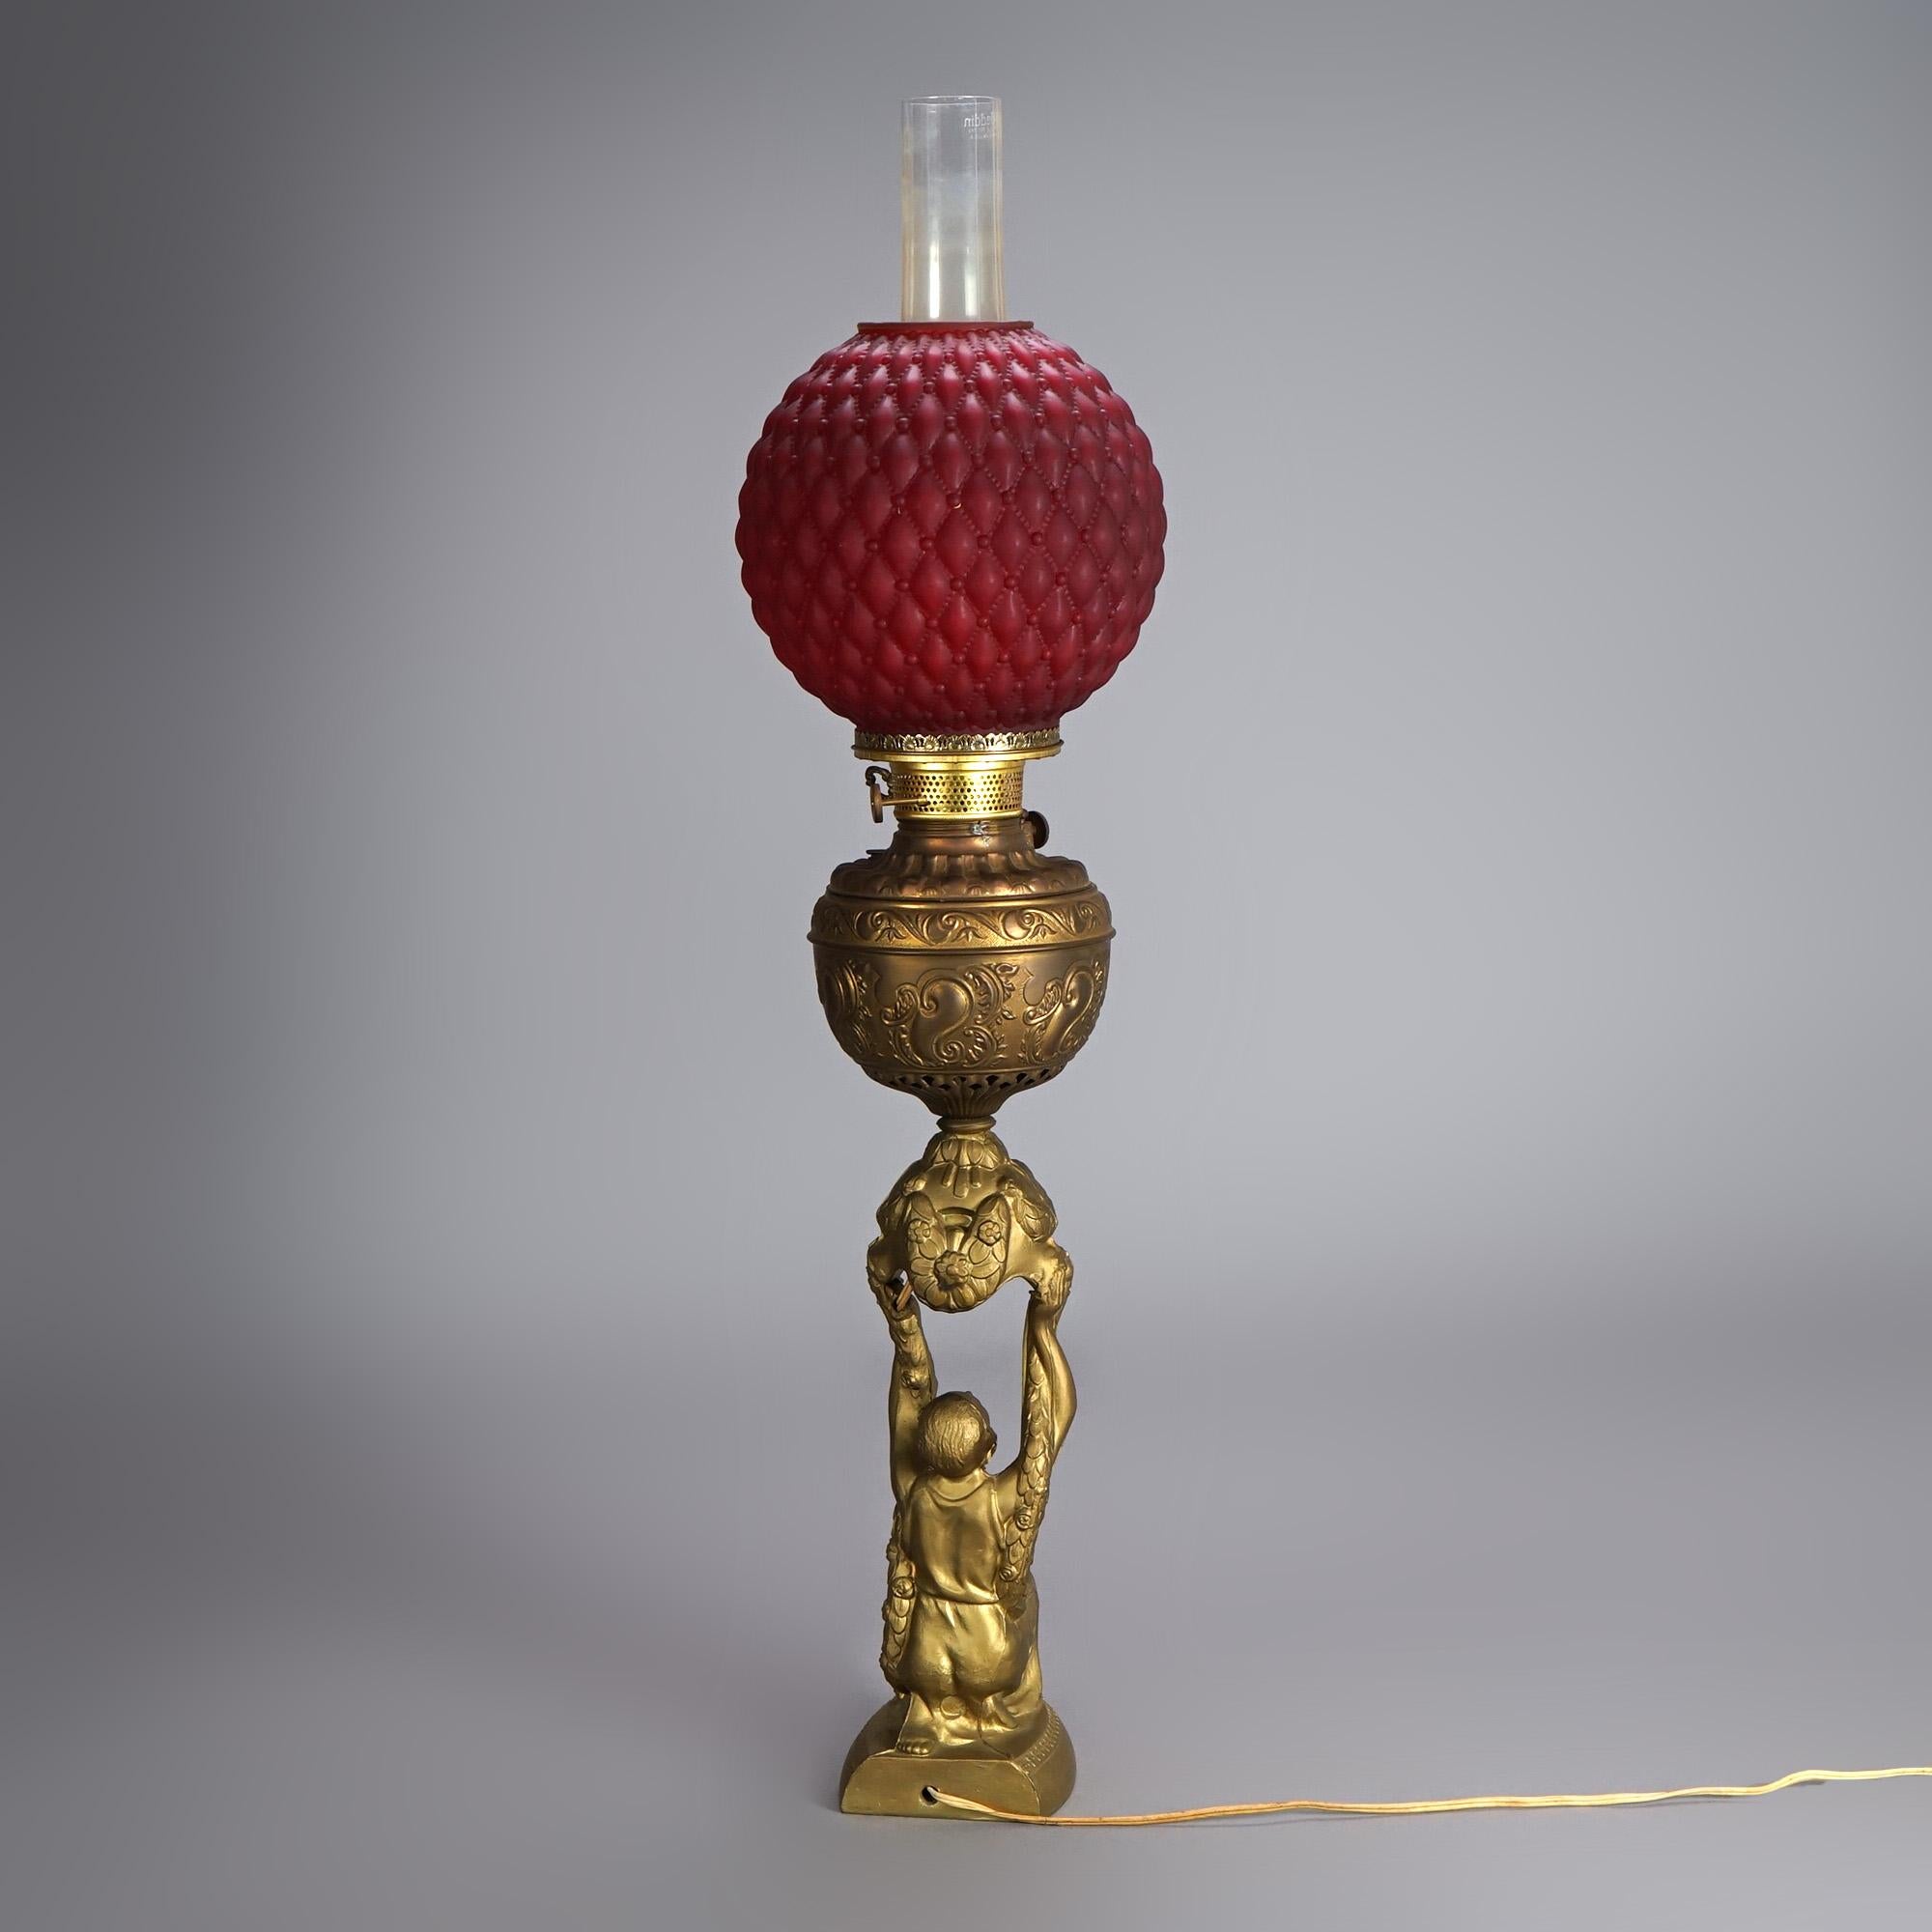 20th Century Antique Figural Gilt Metal Parlor Lamp with Quilted Red Glass Shade Circa 1900 For Sale